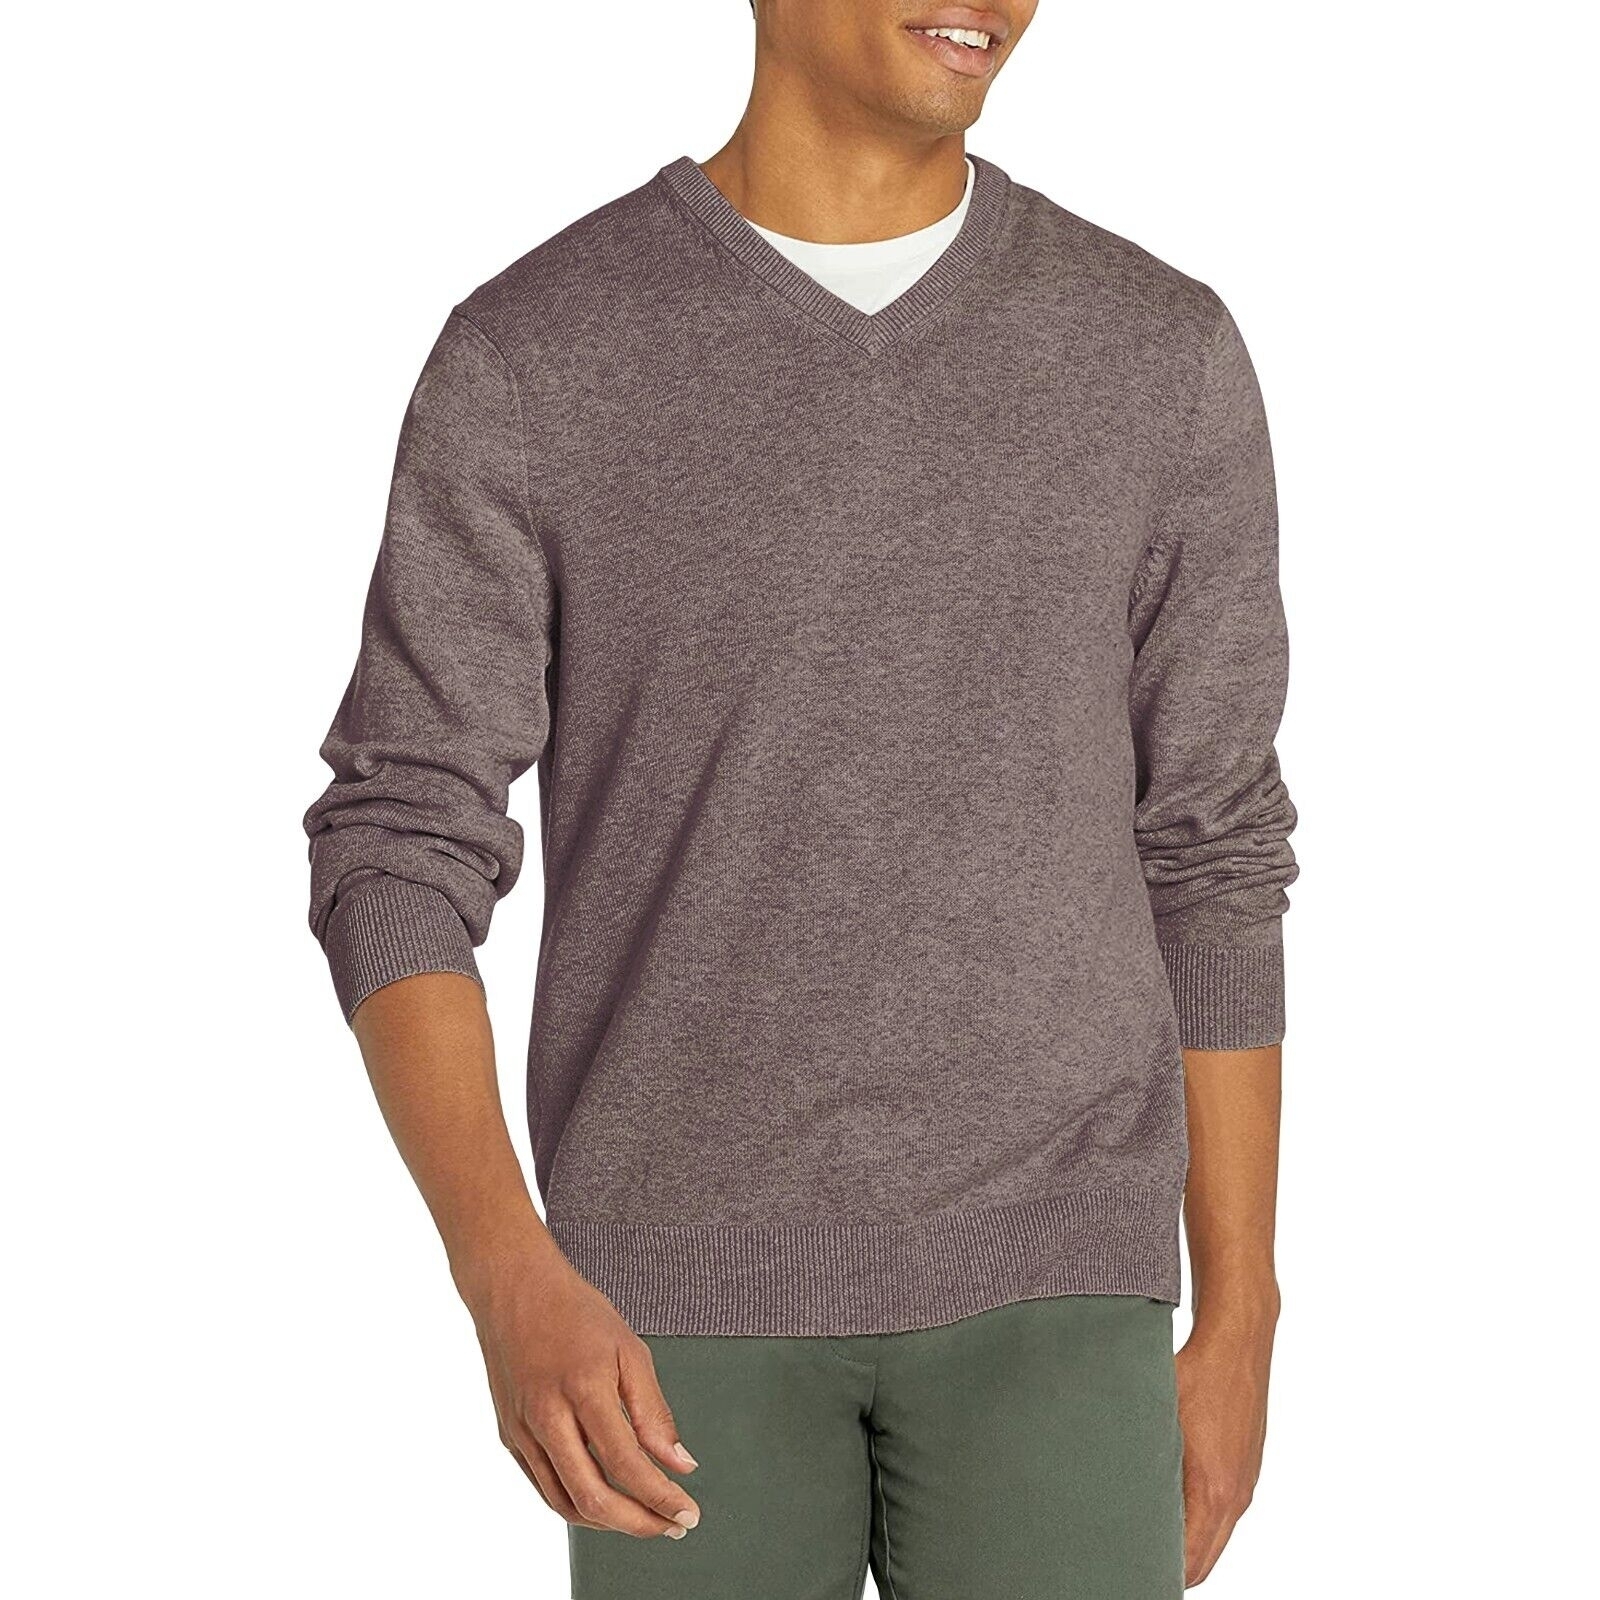 Men's Casual Ultra-Soft Slim Fit Warm Knit Pullover V-Neck Sweater For Winter - Brown, X-Large